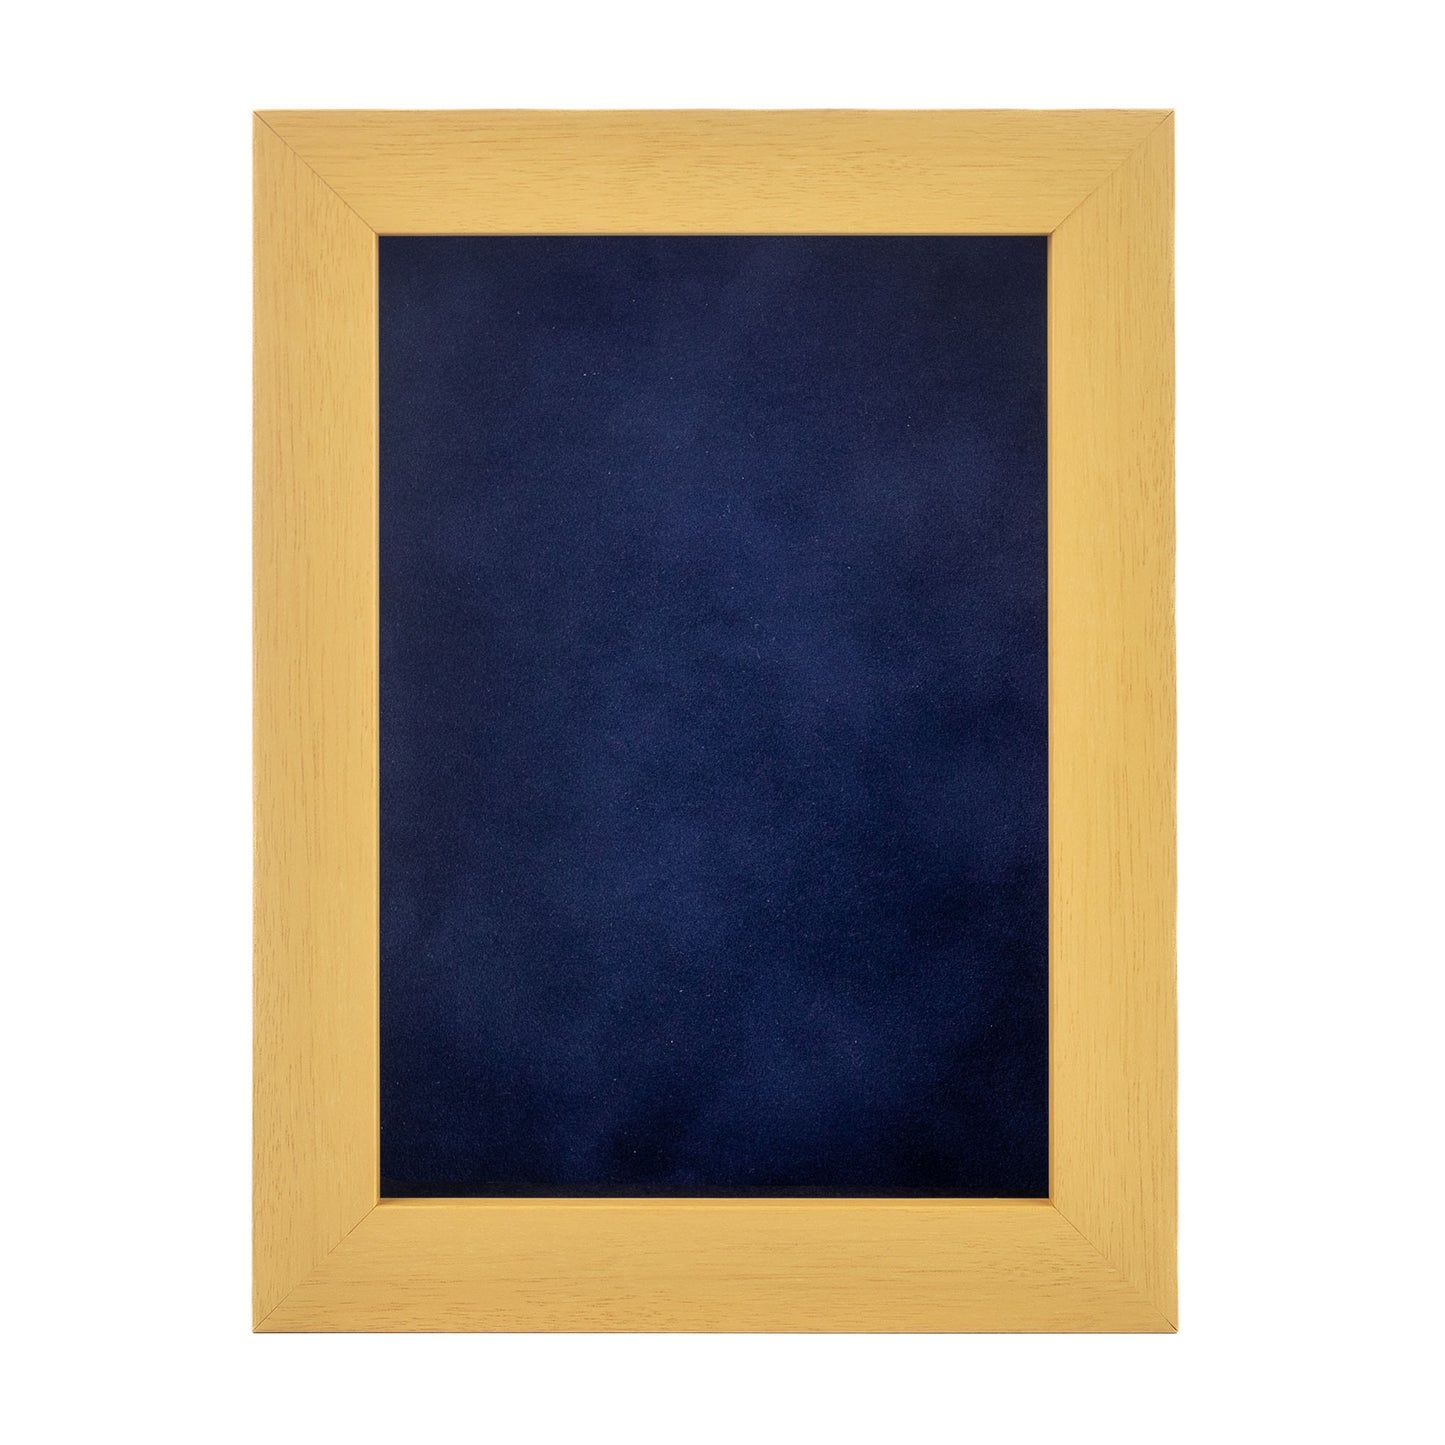 Natural Shadow Box Frame With Navy Blue Acid-Free Suede Backing